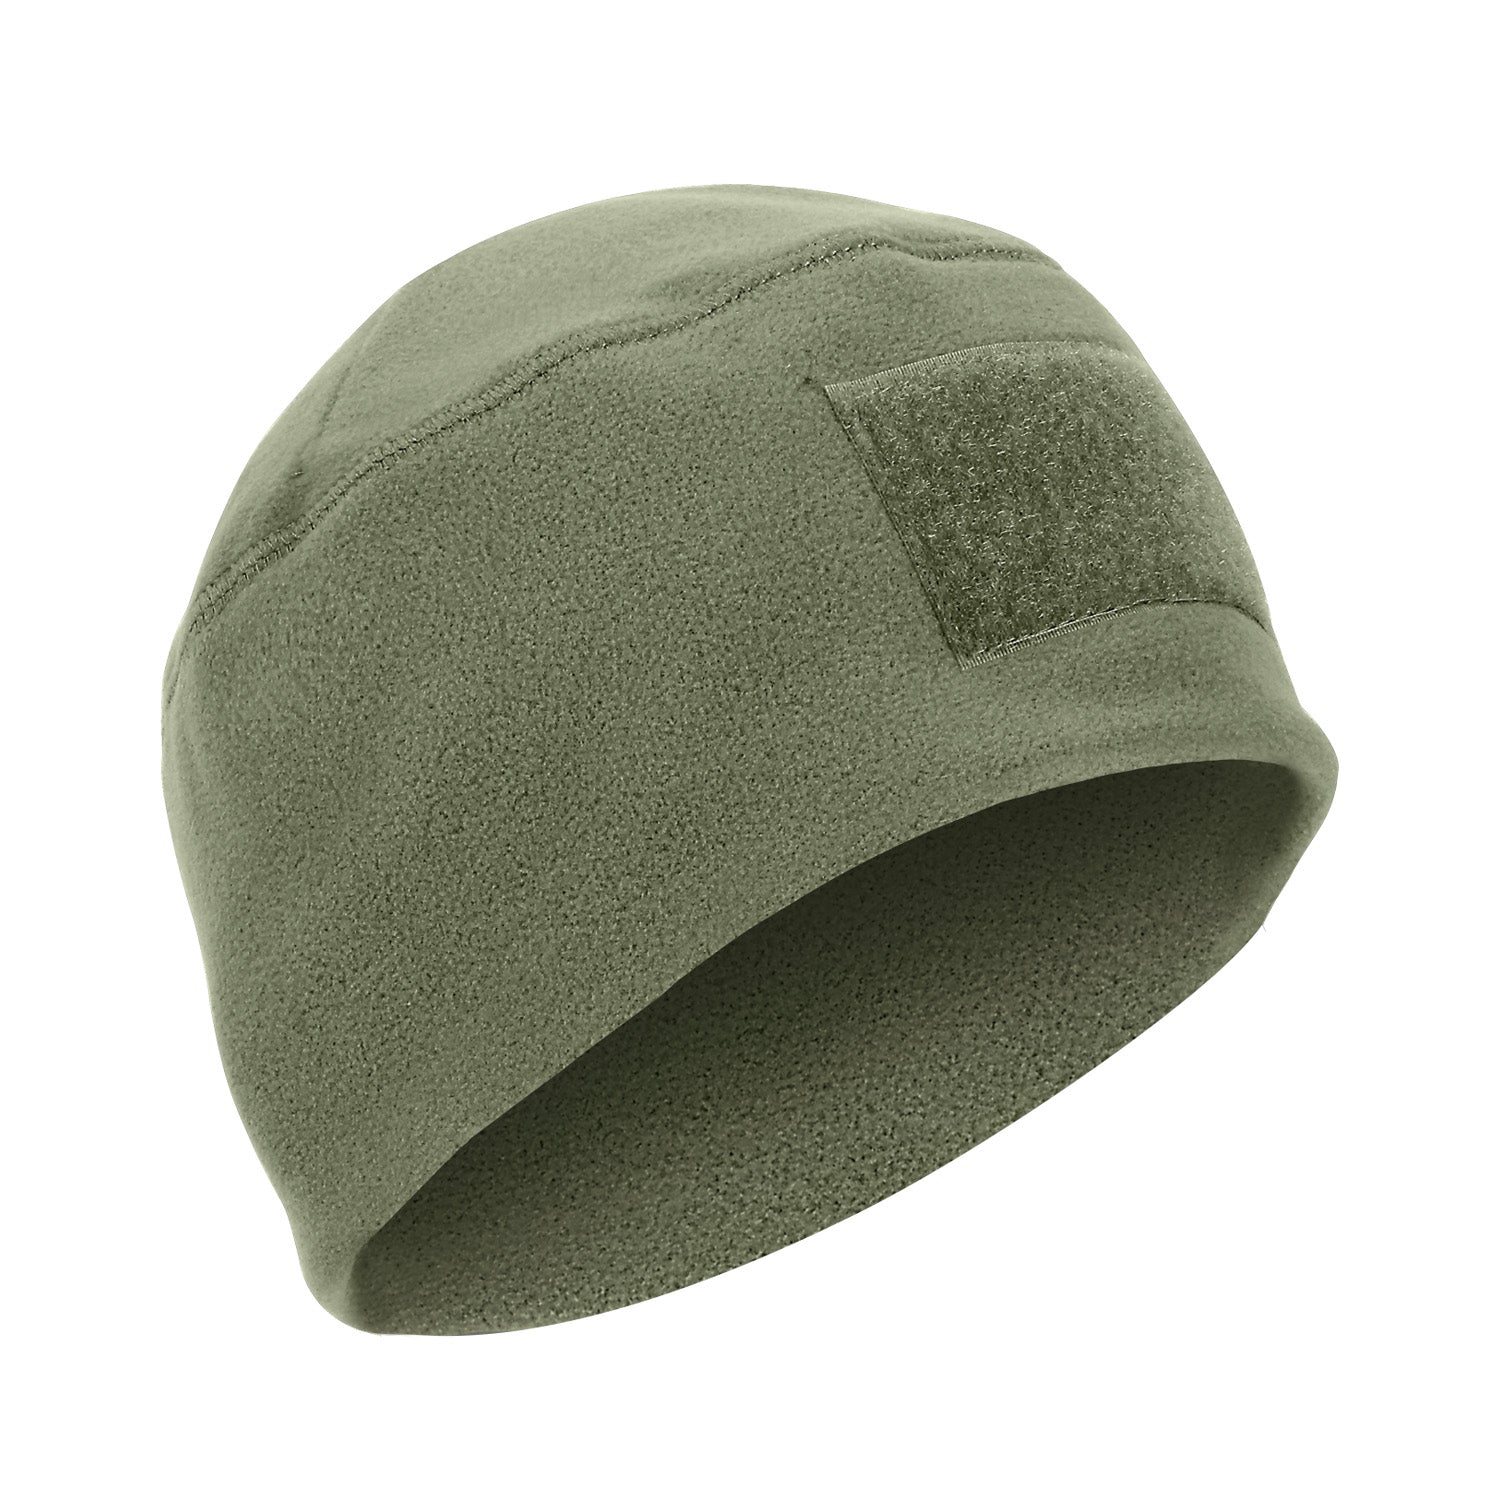 Tactical Beanie With Velcro For Patches is constructed with extra warm polar fleece material that will keep you warm whether you are tackling the great outdoors or on the airsoft field.   Extra Warm Polar Fleece Material Keeps You Warm Even In The Harshest Environments Fully Customizable Beanie with 8xx5cm Loop Field For Attaching Flag Or Morale Patches (Patches Sold Separately) Low Profile Design Can Fit Comfortably Under A Helmet One Size Fits Most